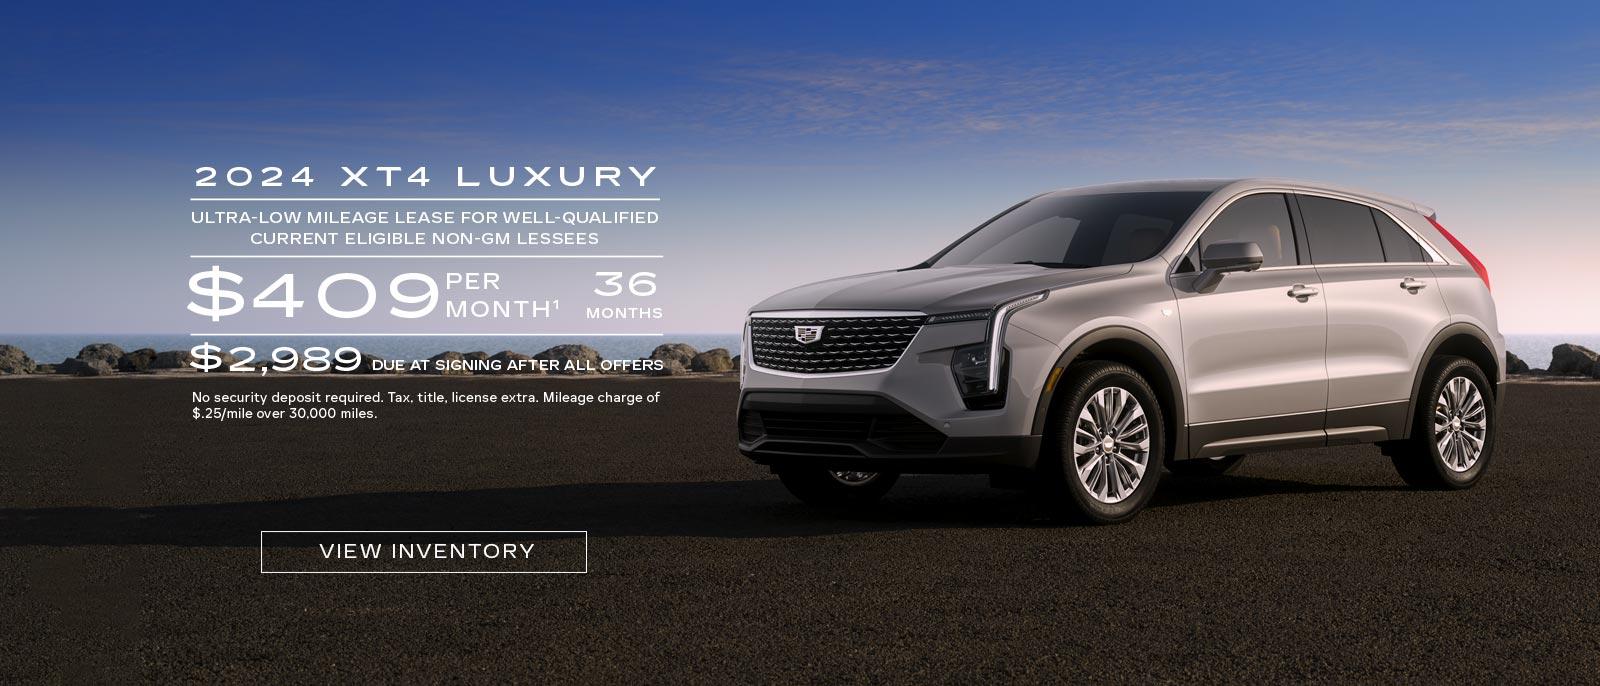 2024 XT4 Luxury. Ultra-low mileage lease for well-qualified current eligible Non-GM Lessees. $409 per month. 36 months. $2,989 due at signing after all offers.